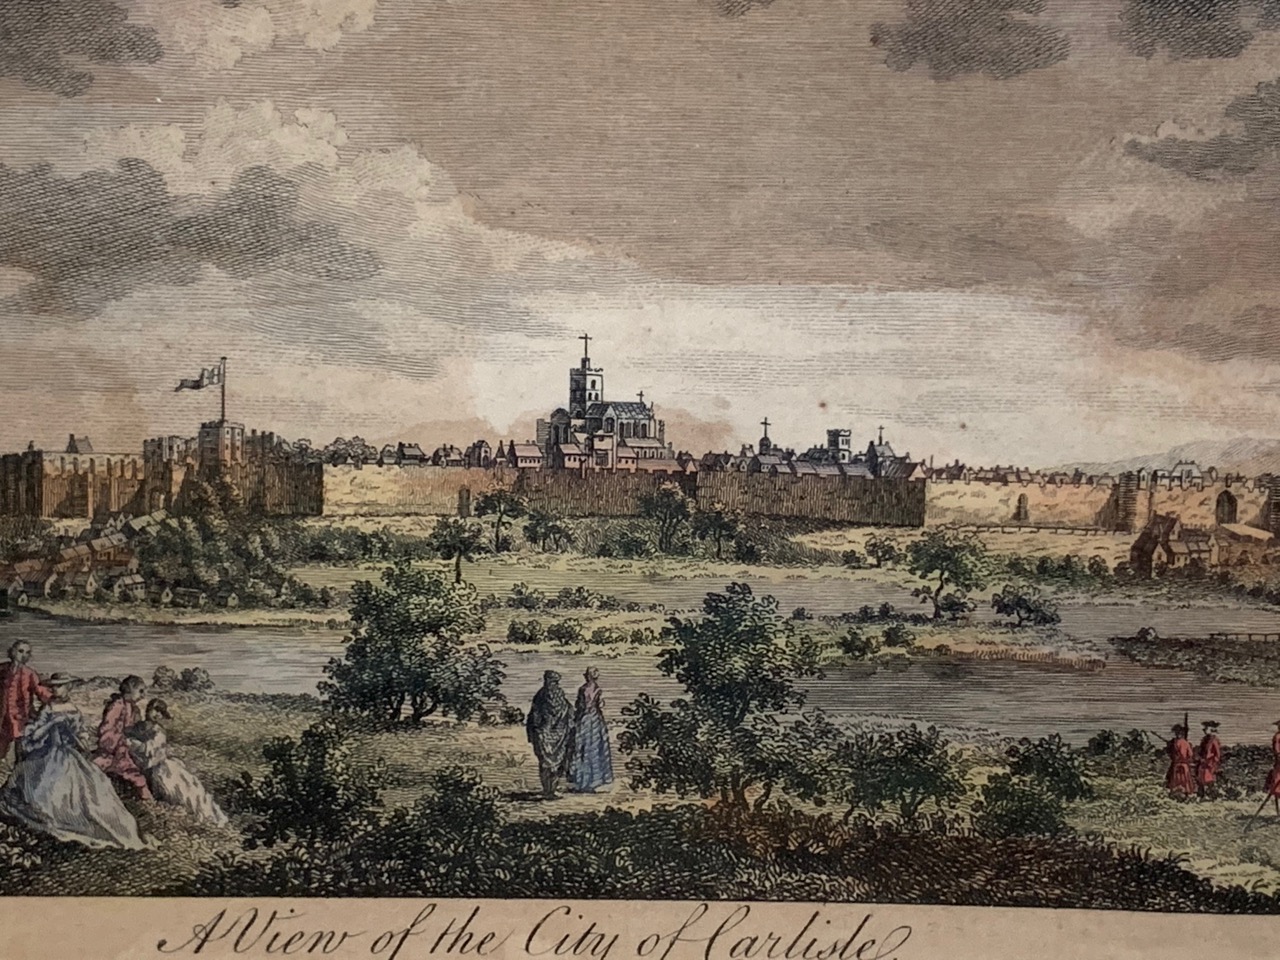 An antique engraving "A View of the City of Carlisle", originally published in The Modern